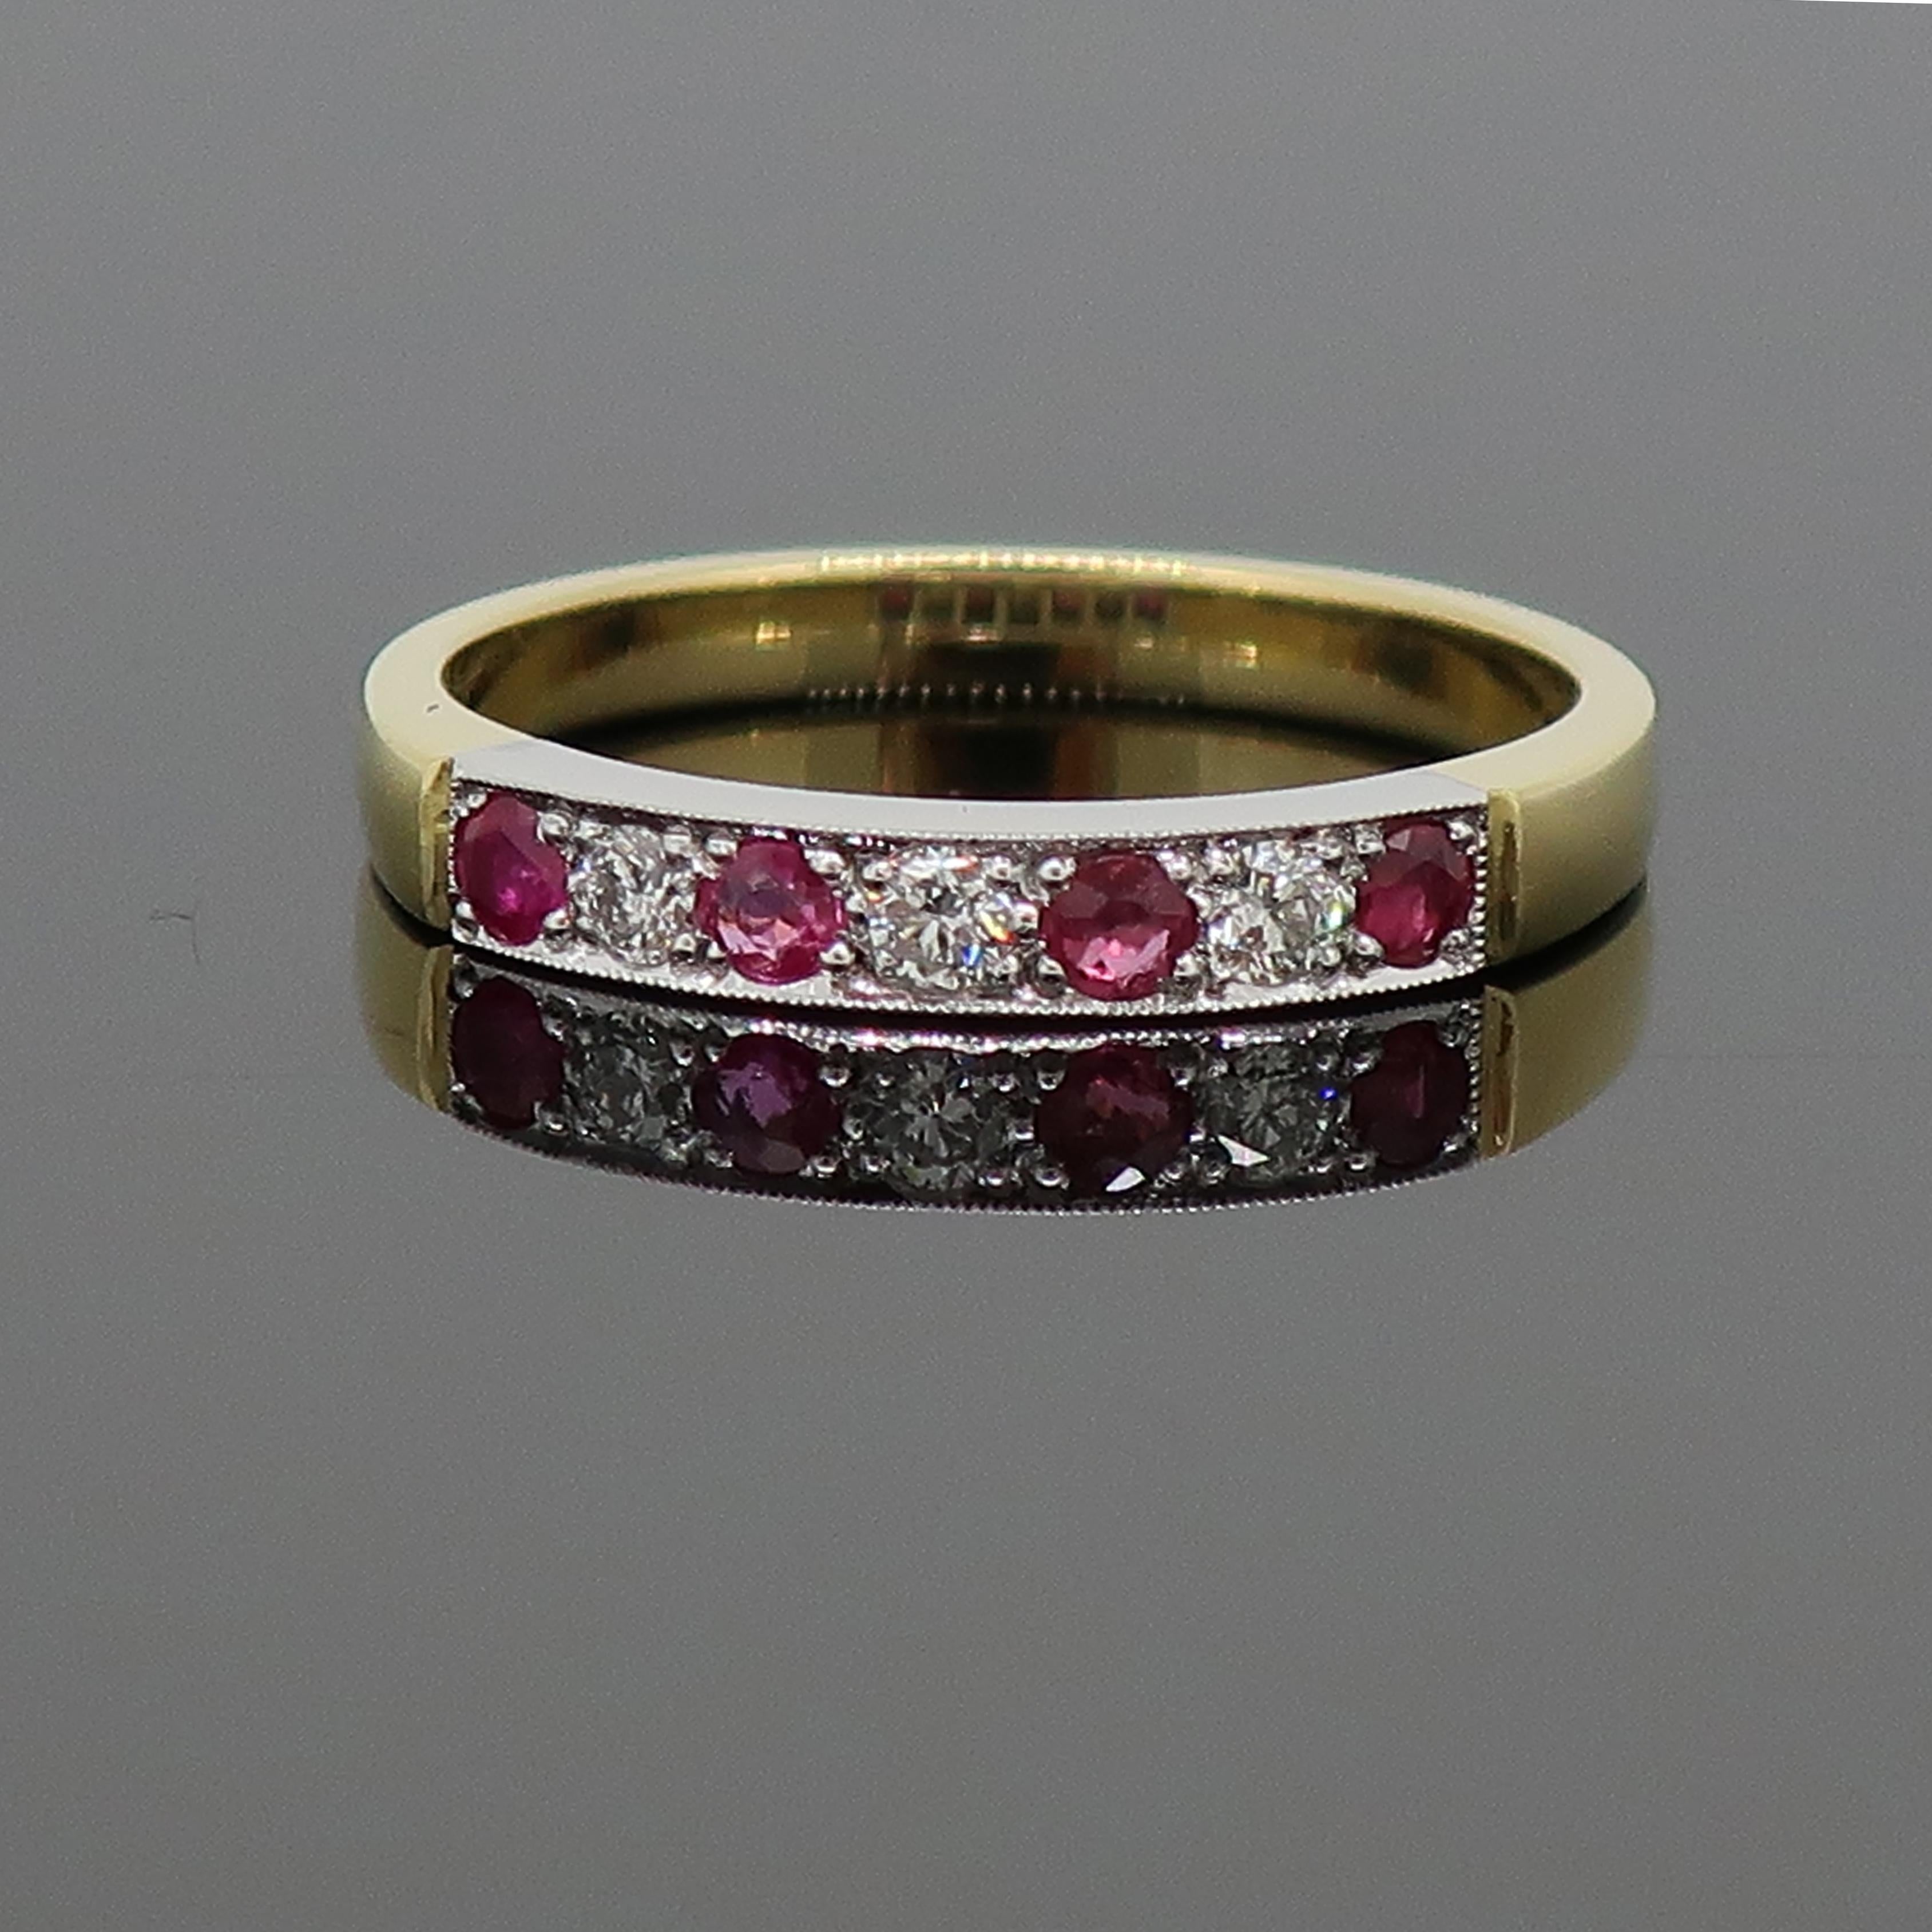 18 Karat Ruby And Diamond Eternity Band Ring Yellow And White Gold

A simple but classic seven stone ruby and diamond eternity ring. The ring consists of four round rubies and three round brilliant cut diamonds, all set in a mill-grain setting in